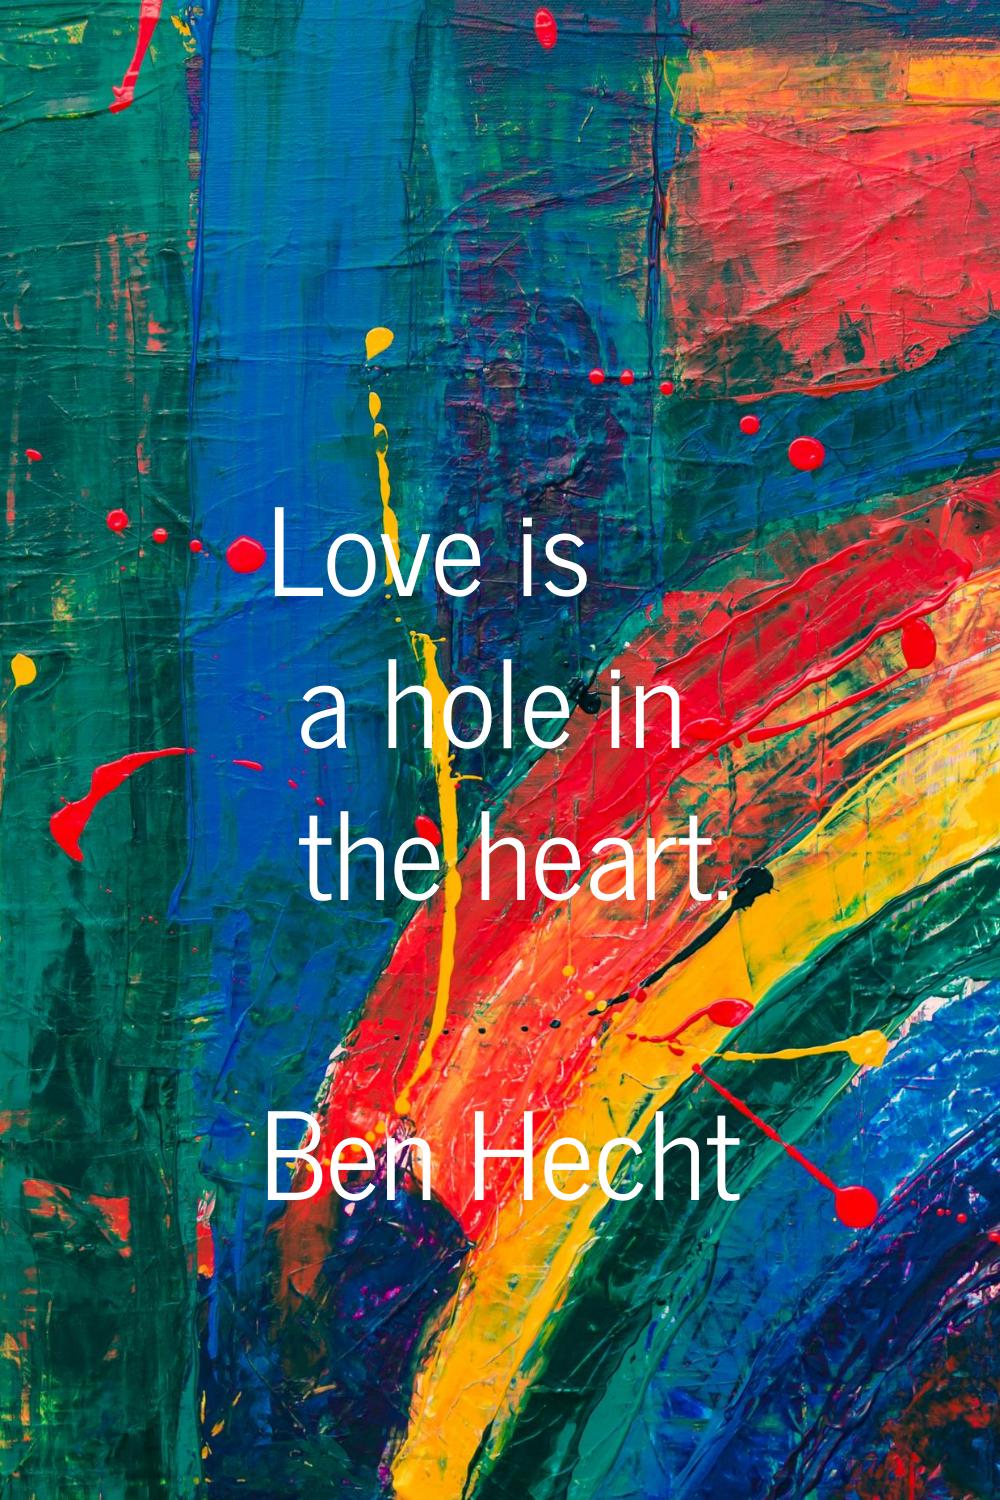 Love is a hole in the heart.